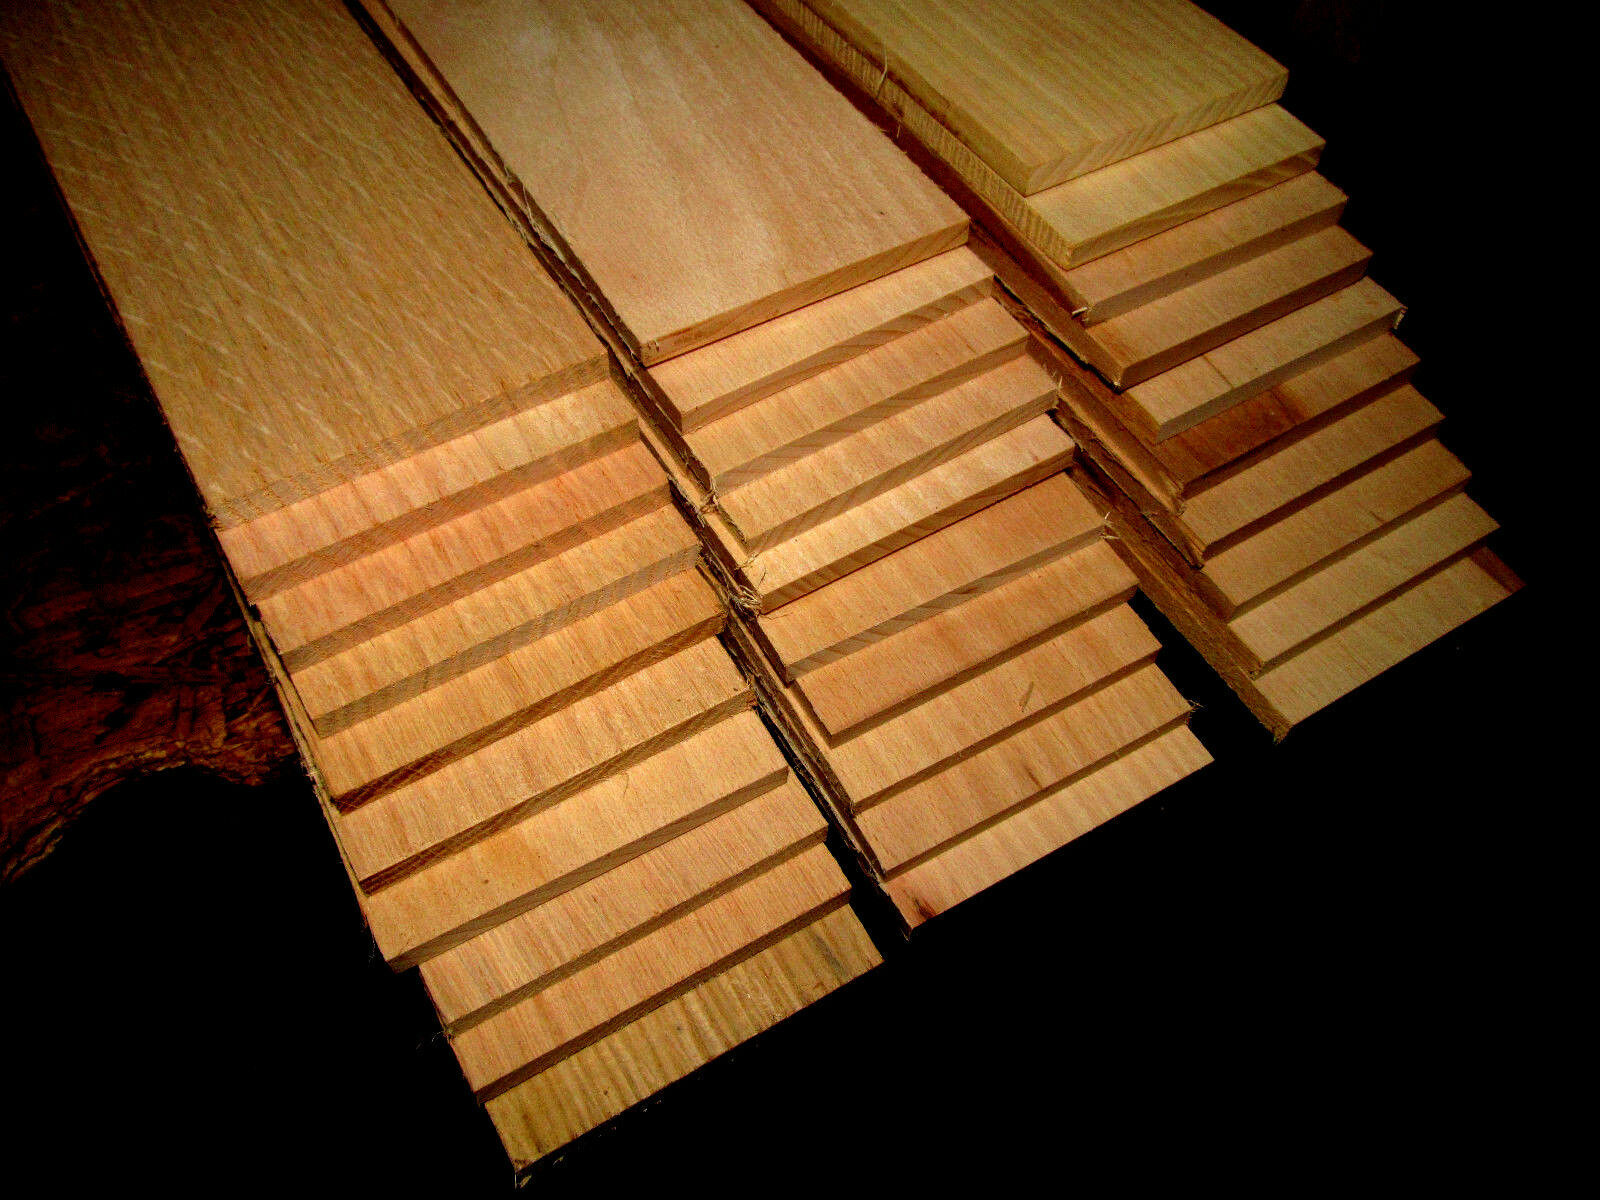 8 PIECES THIN SANDED BEECH 12